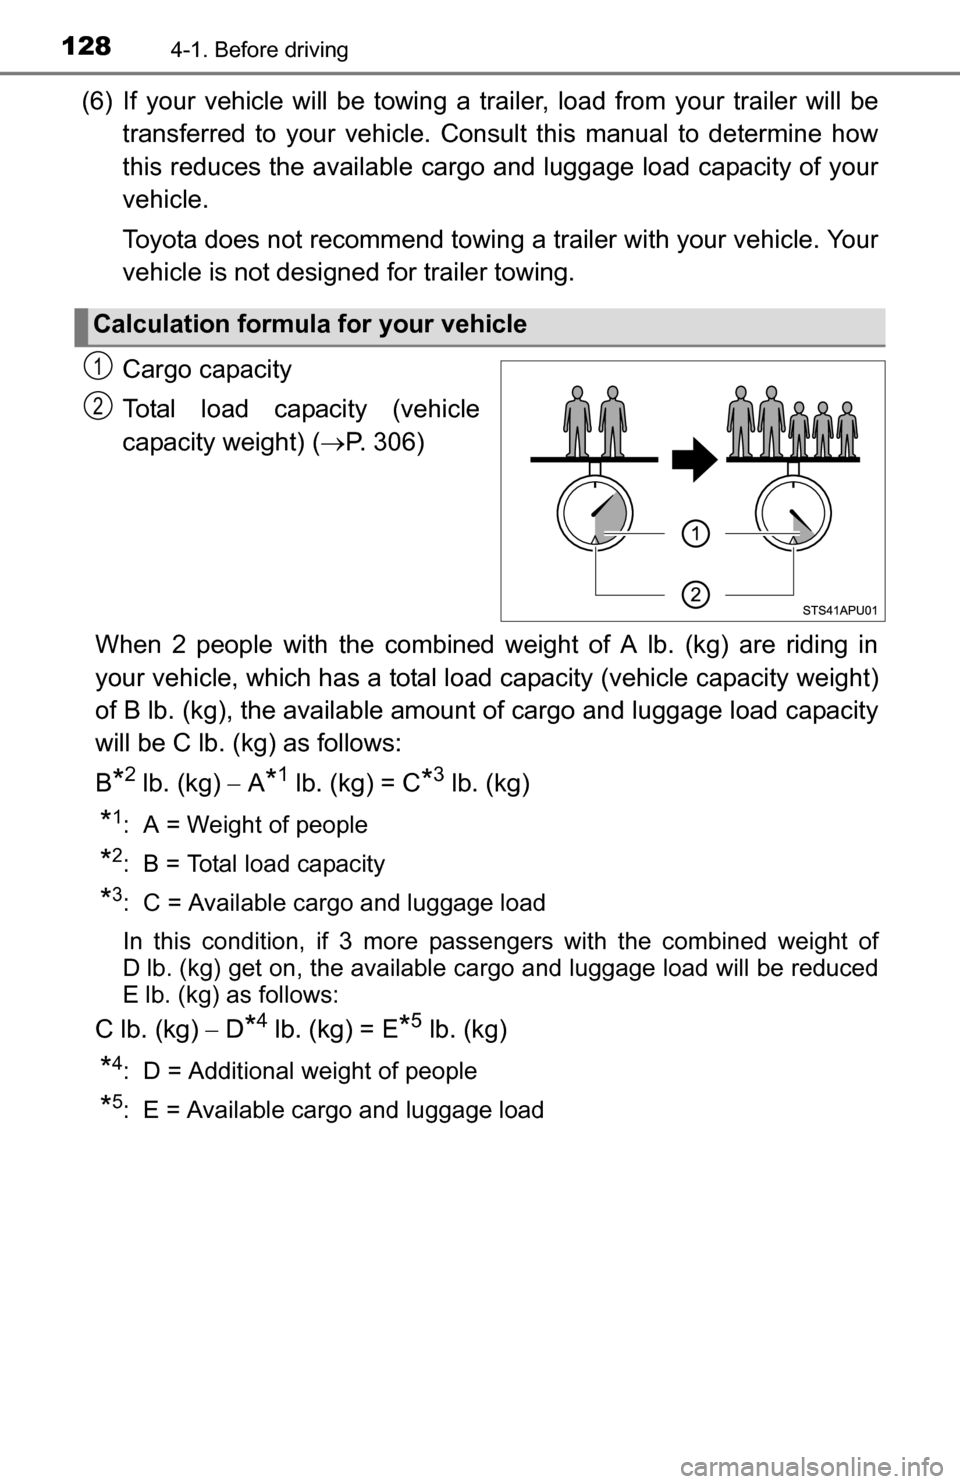 TOYOTA YARIS 2016 3.G Owners Manual 1284-1. Before driving
(6) If your vehicle will be towing a trailer, load from your trailer will be
transferred to your vehicle. Consult this manual to determine how
this reduces the available cargo  